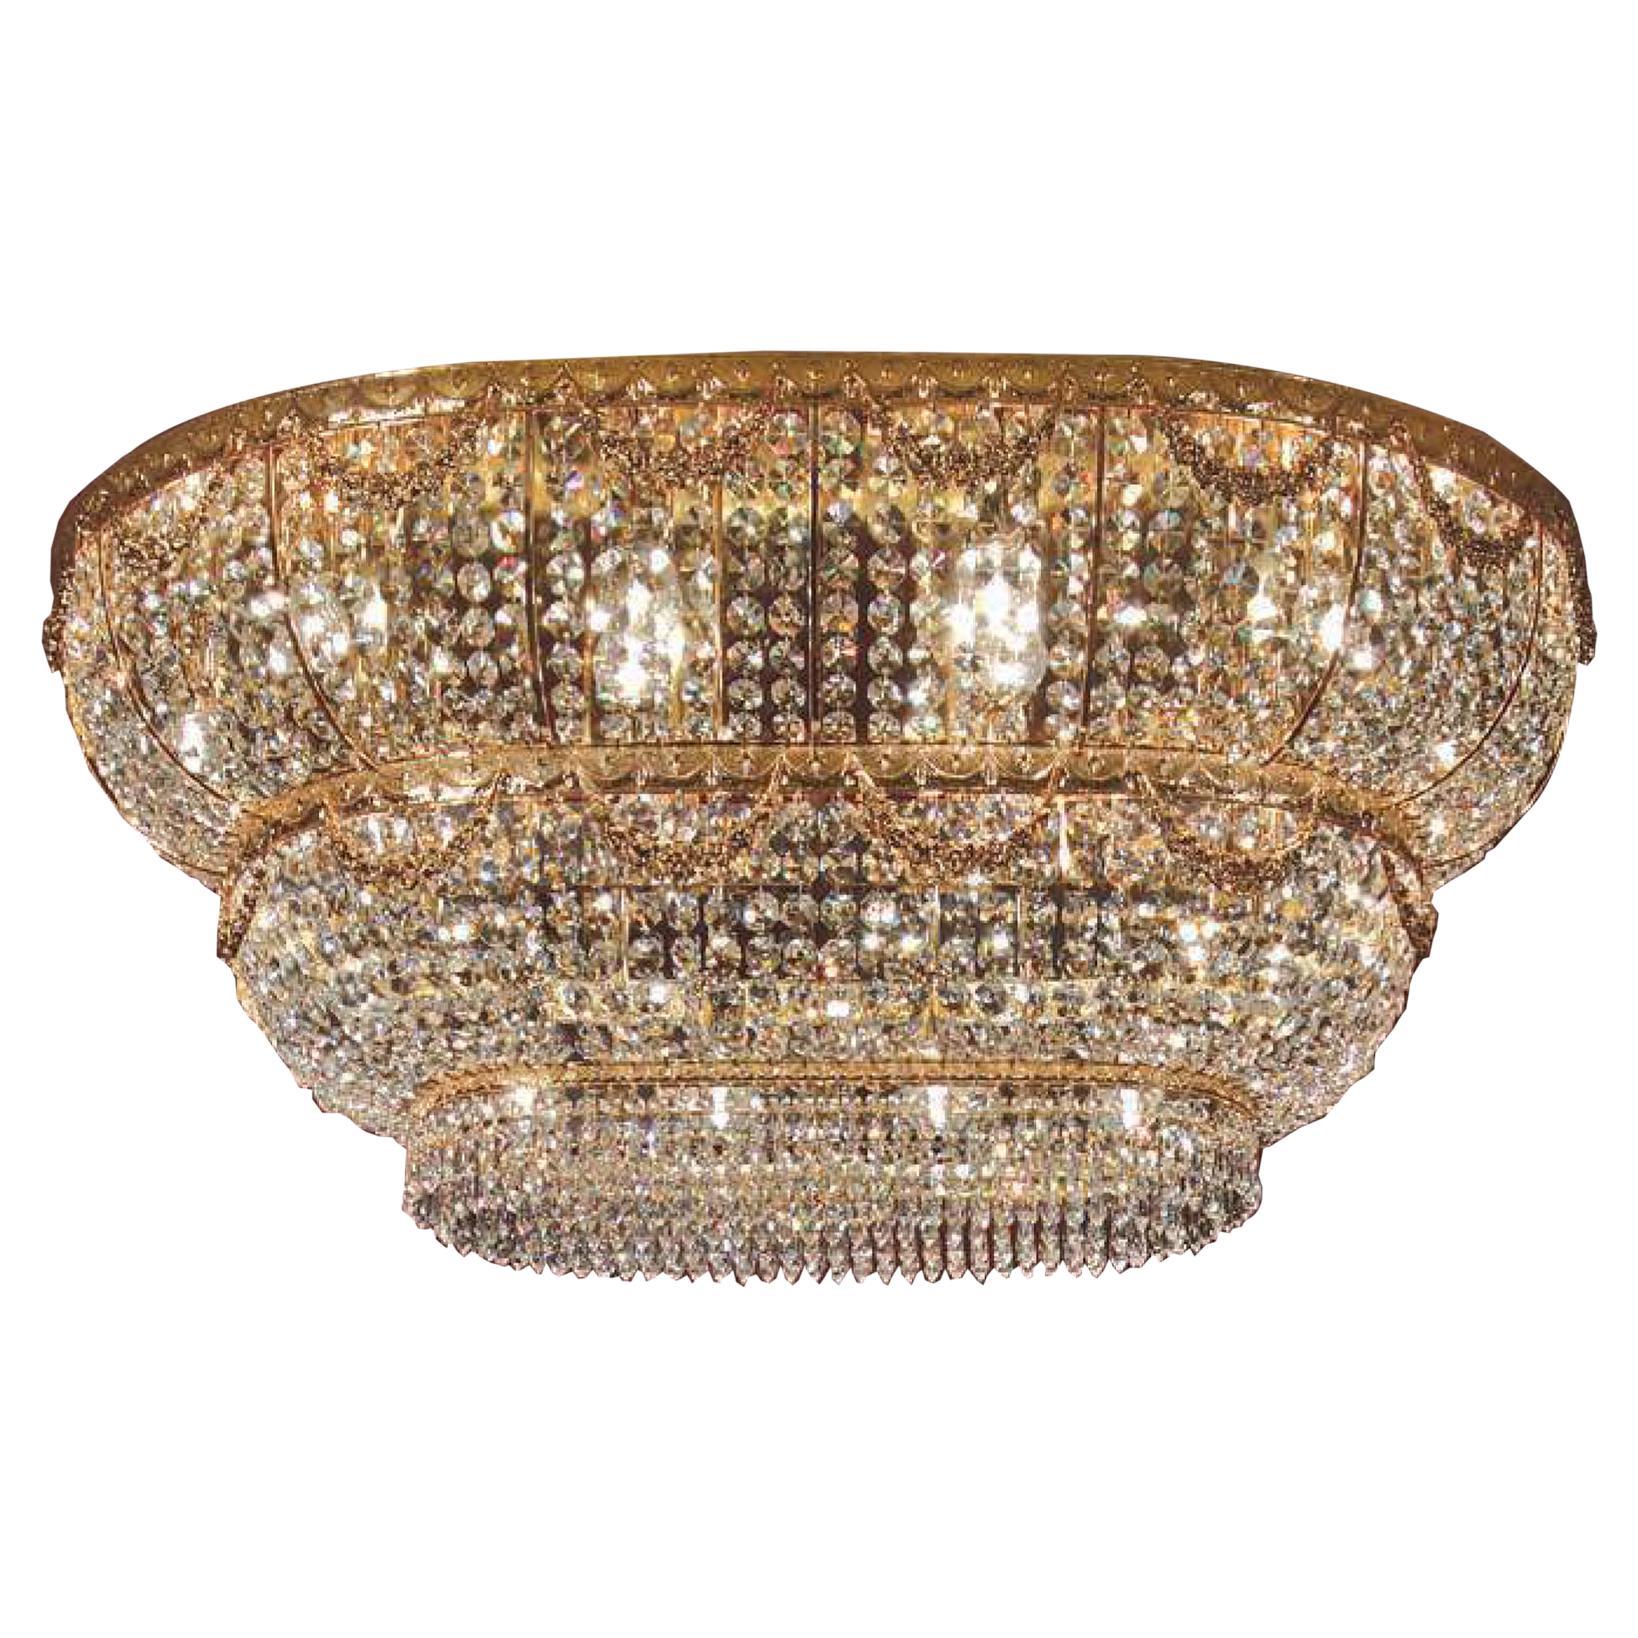 Majestic Italian Villa Ceiling Lamp in 24kt Gold Plate with Transparent Crystals For Sale